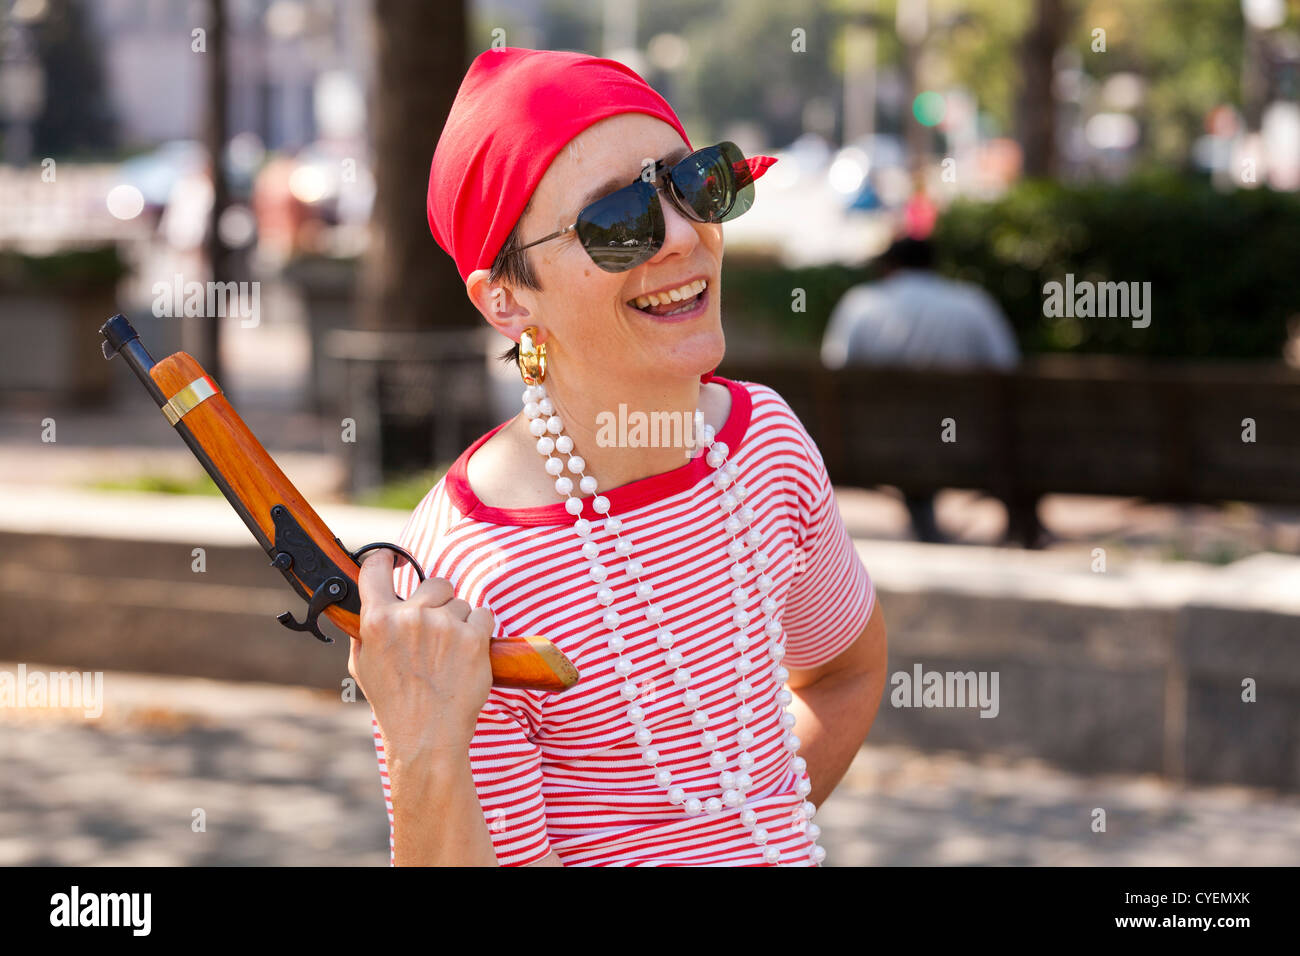 Woman dressed as a pirate holding a flintlock pistol Stock Photo